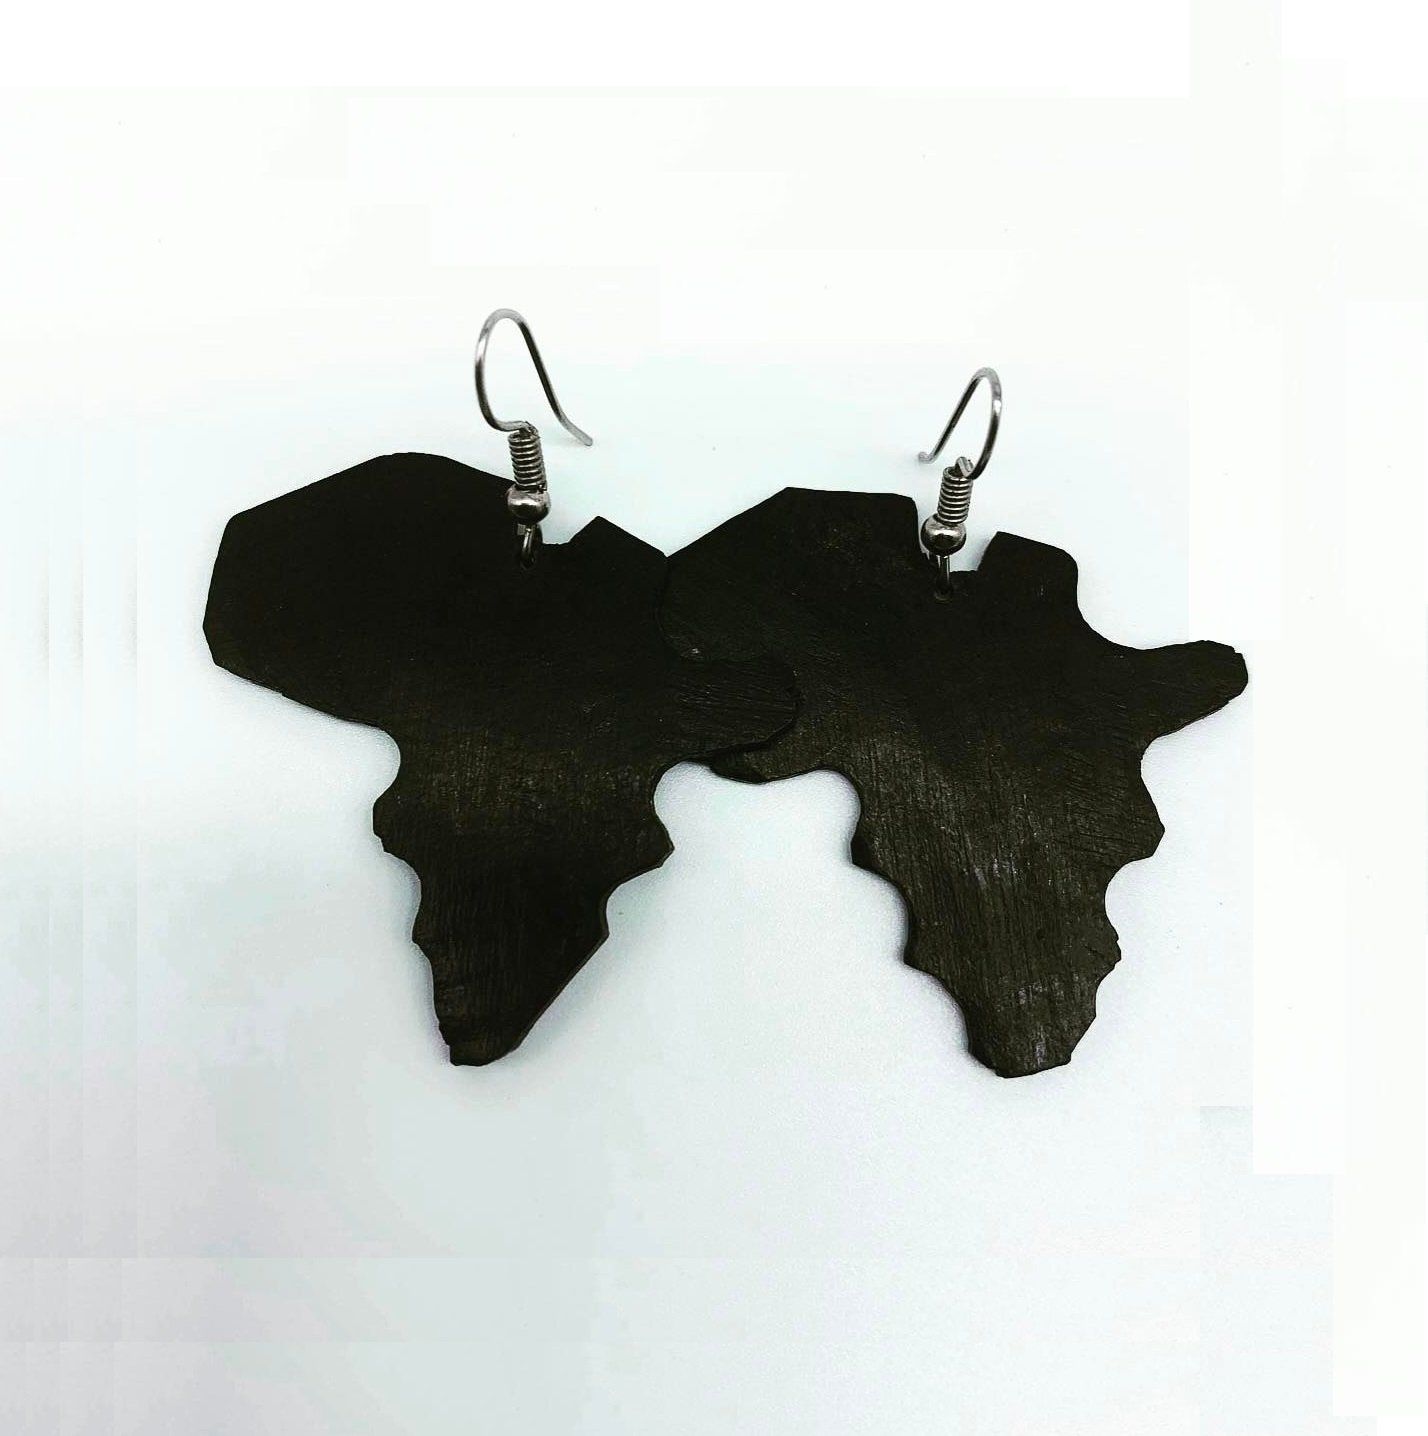 African Earrings from Lillon Boutique on AfroBiz Marketplace